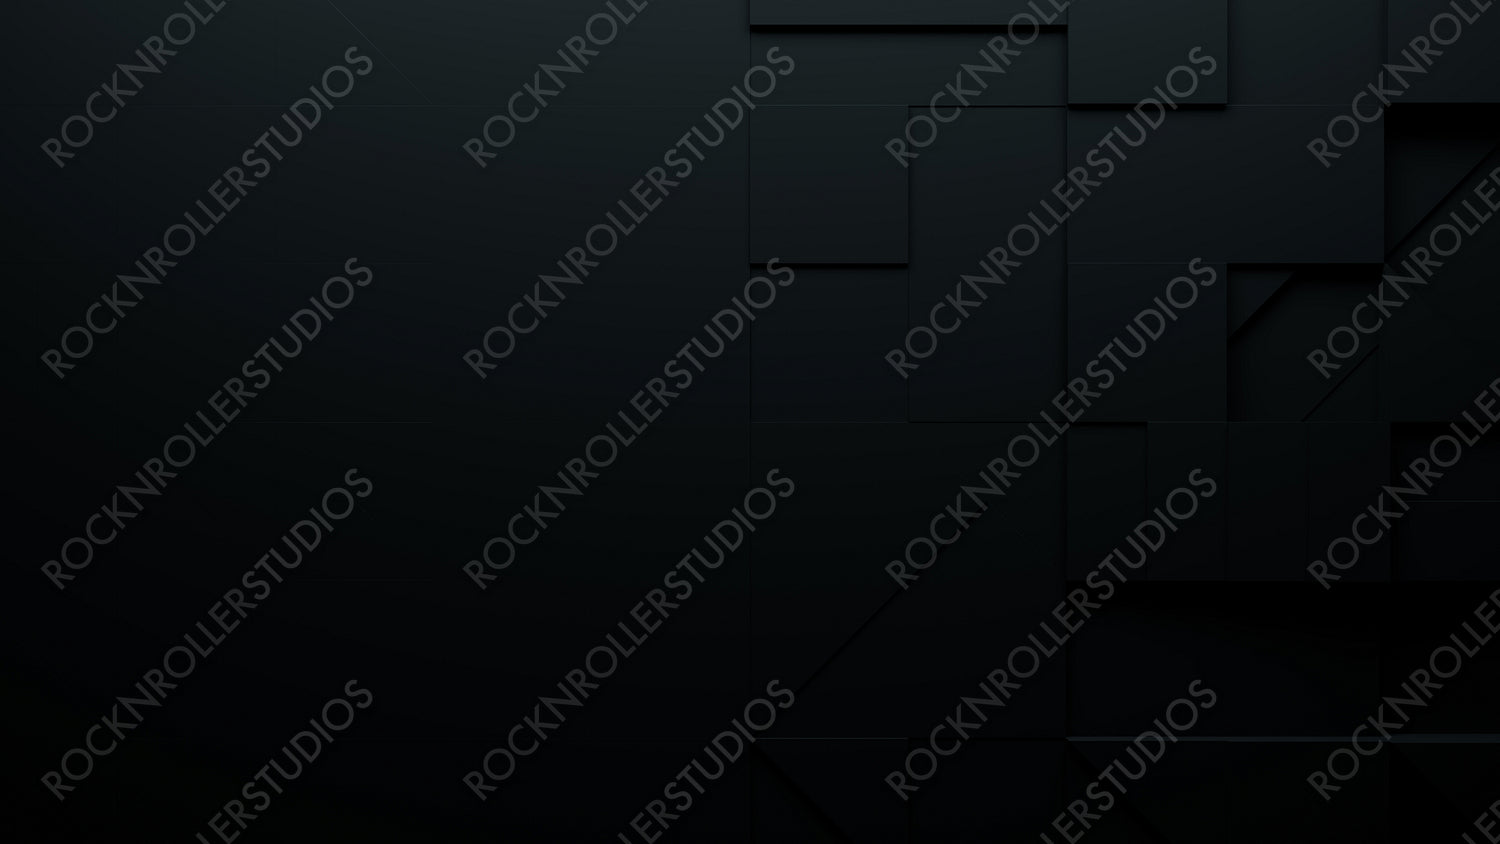 Abstract background formed from Black 3D Blocks. Tech 3D Render with copy-space.